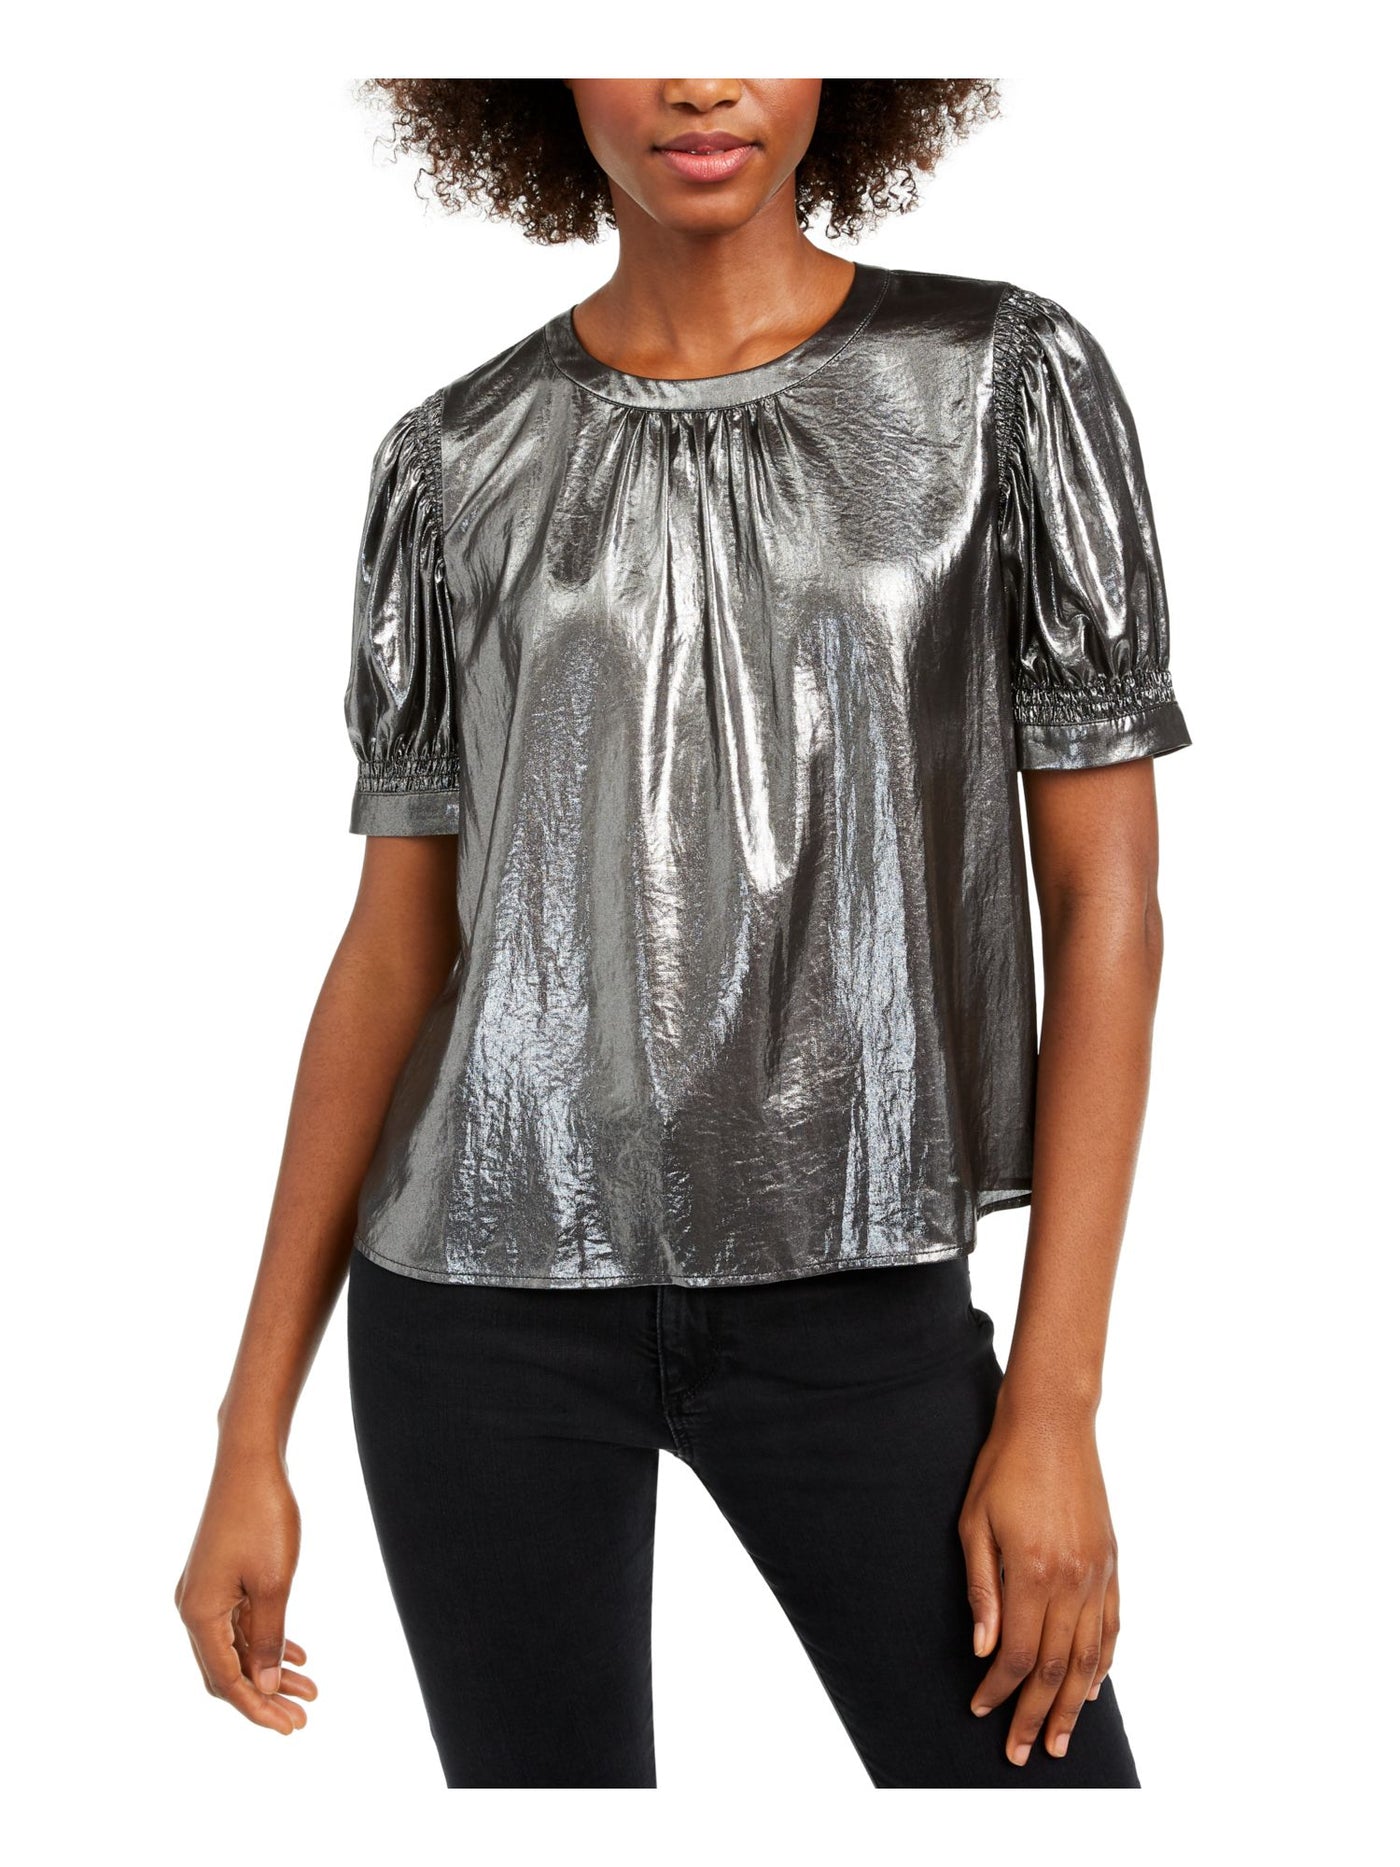 CURRENT AIR Womens Silver Short Sleeve Crew Neck Evening Top M